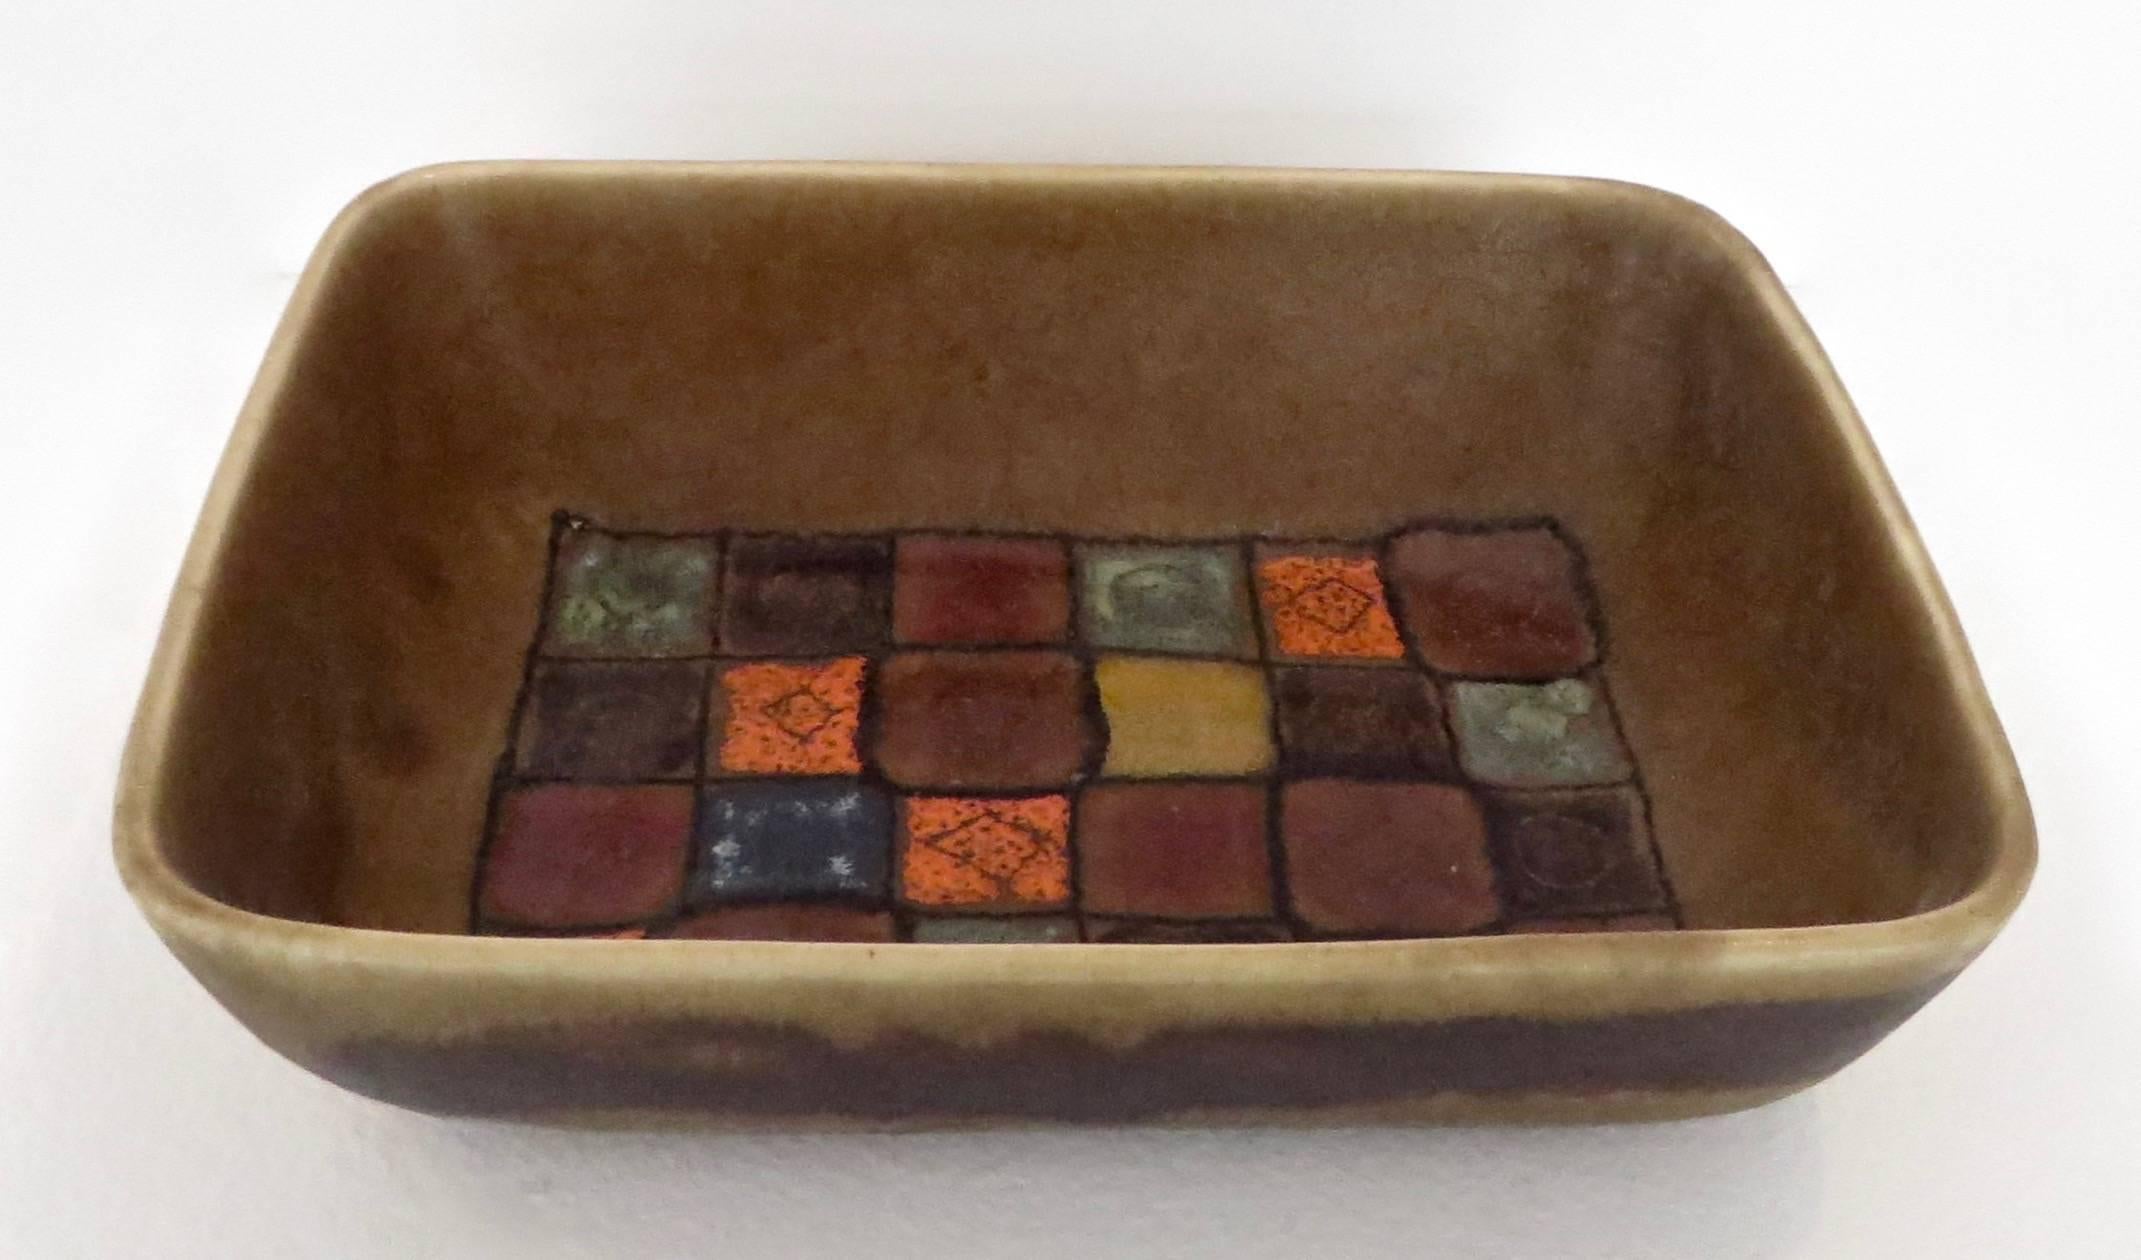 Very unusual Guido Gambone polychrome rectangular ceramic Italian dish.
An interesting and vibrant palette of colors in ochre background and detailed interior. The grid of brown, orange and blue is quite unusual for Gambone.
The exterior color is